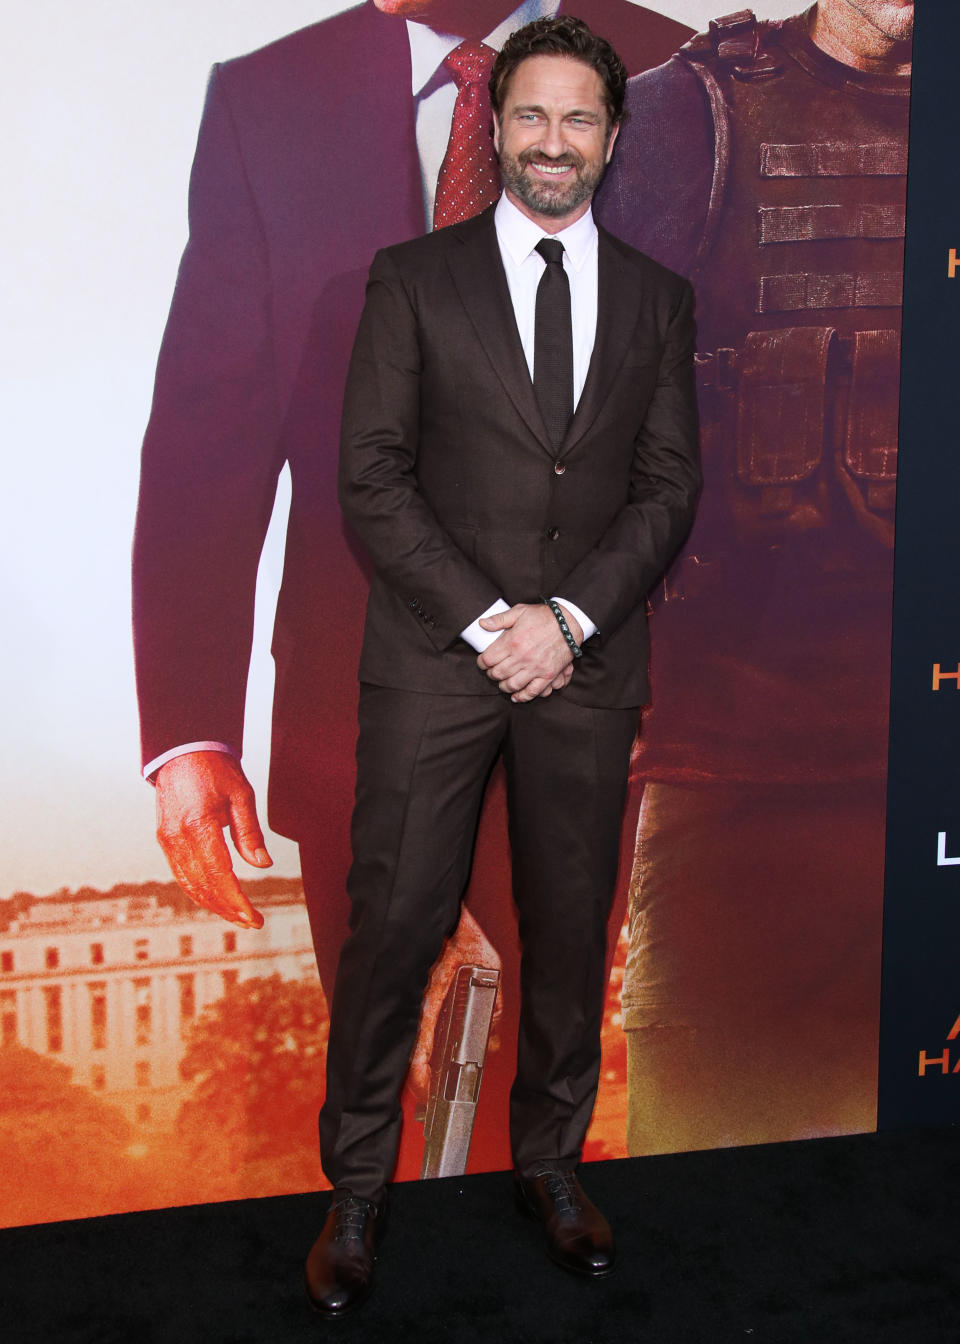 WESTWOOD, LOS ANGELES, CALIFORNIA, USA - AUGUST 20: Actor Gerard Butler arrives at the Los Angeles Premiere Of Lionsgate's 'Angel Has Fallen' held at the Regency Village Theatre on August 20, 2019 in Westwood, Los Angeles, California, United States. (Photo by Xavier Collin/Image Press Agency/Sipa USA)